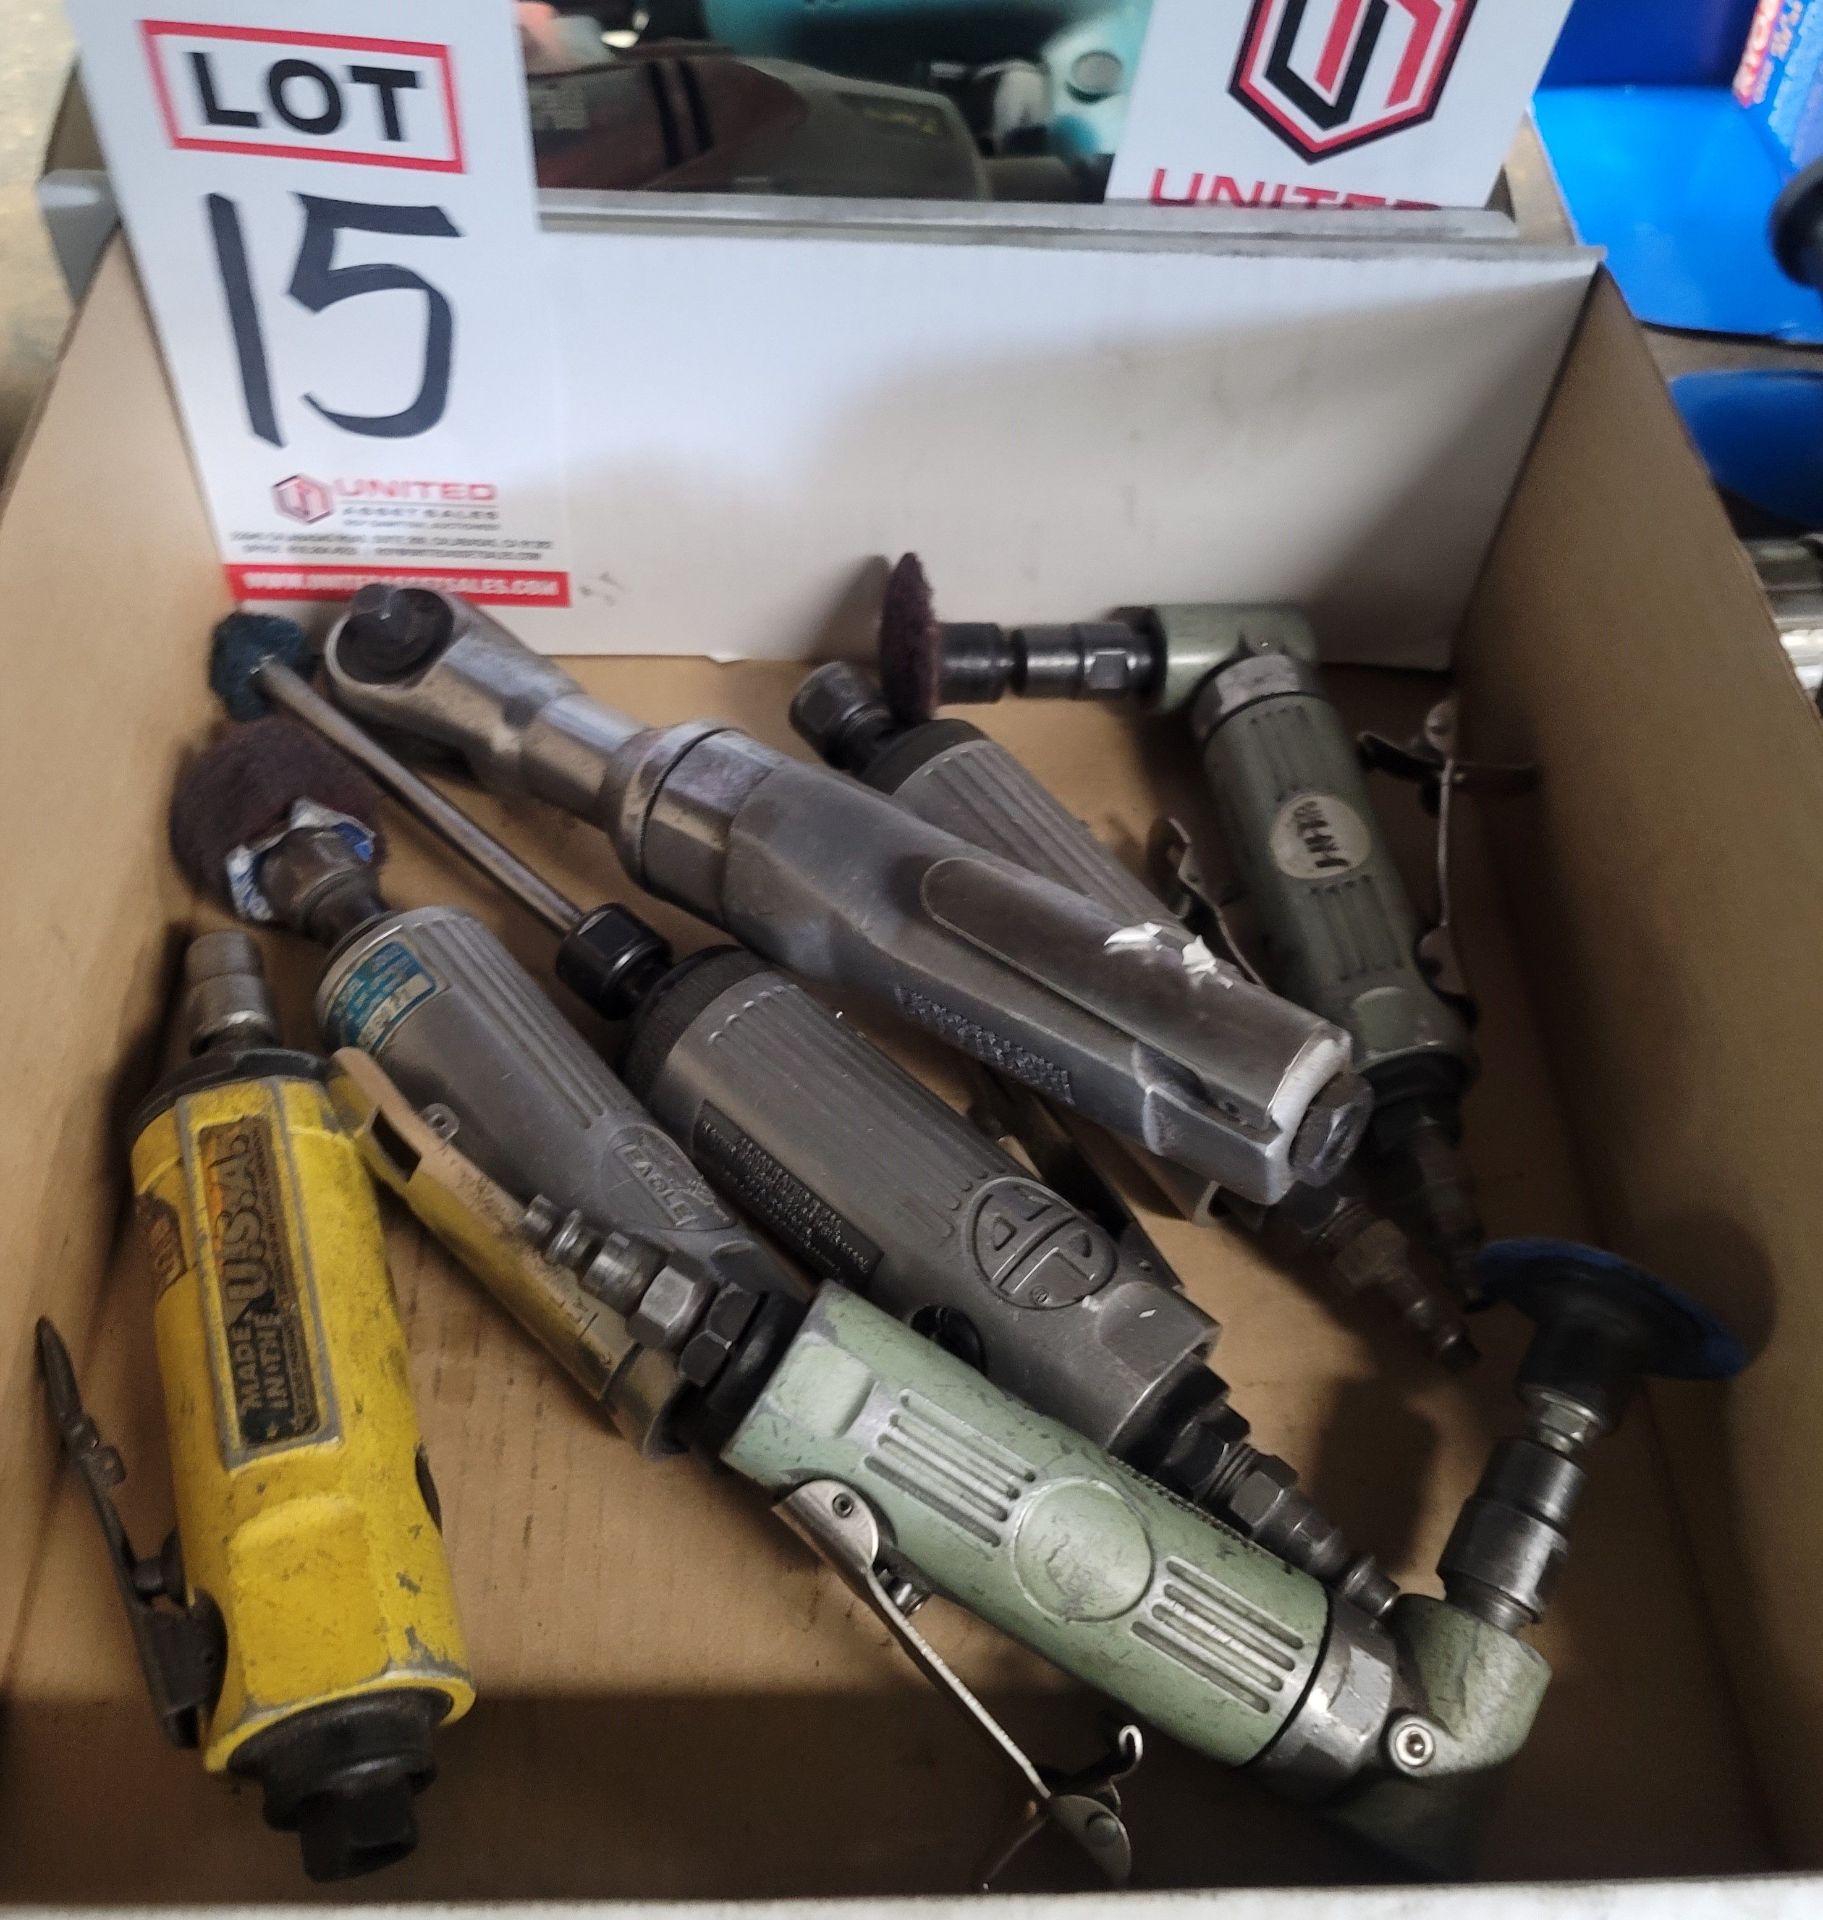 LOT - PNEUMATIC DIE GRINDERS AND 3/8" AIR RATCHET